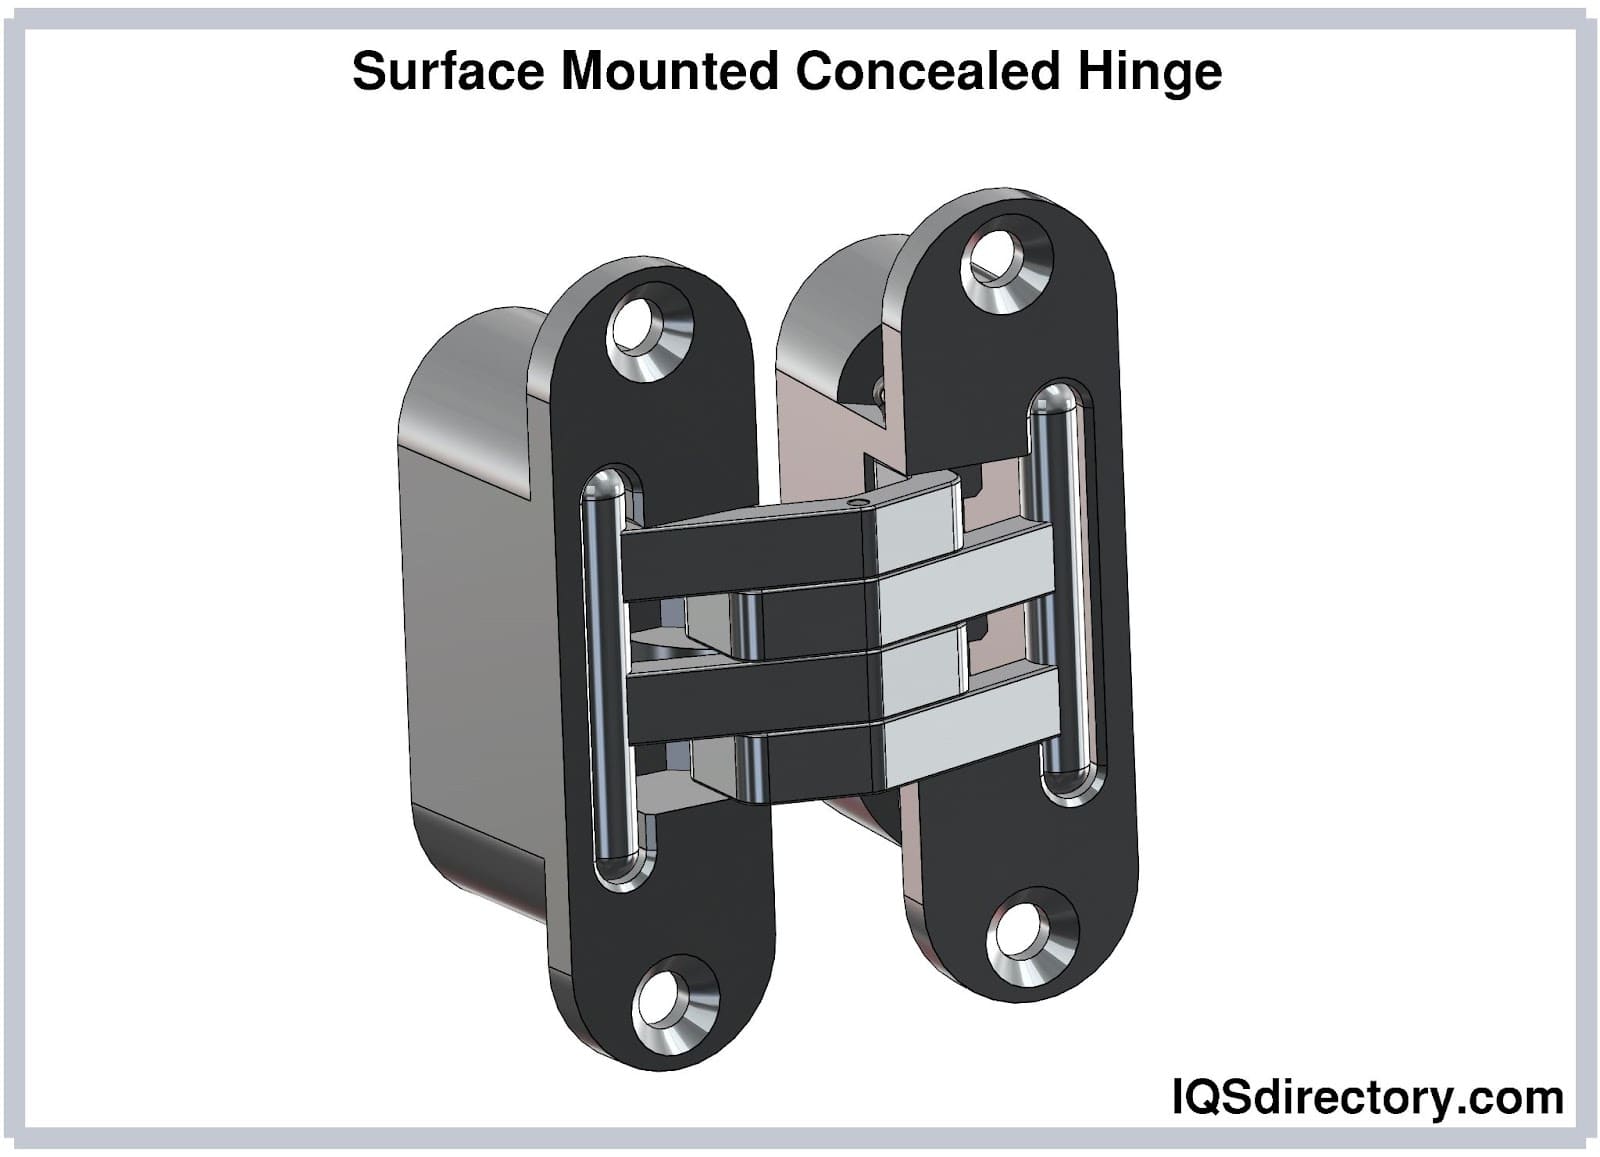 Surface Mounted Concealed Hinge